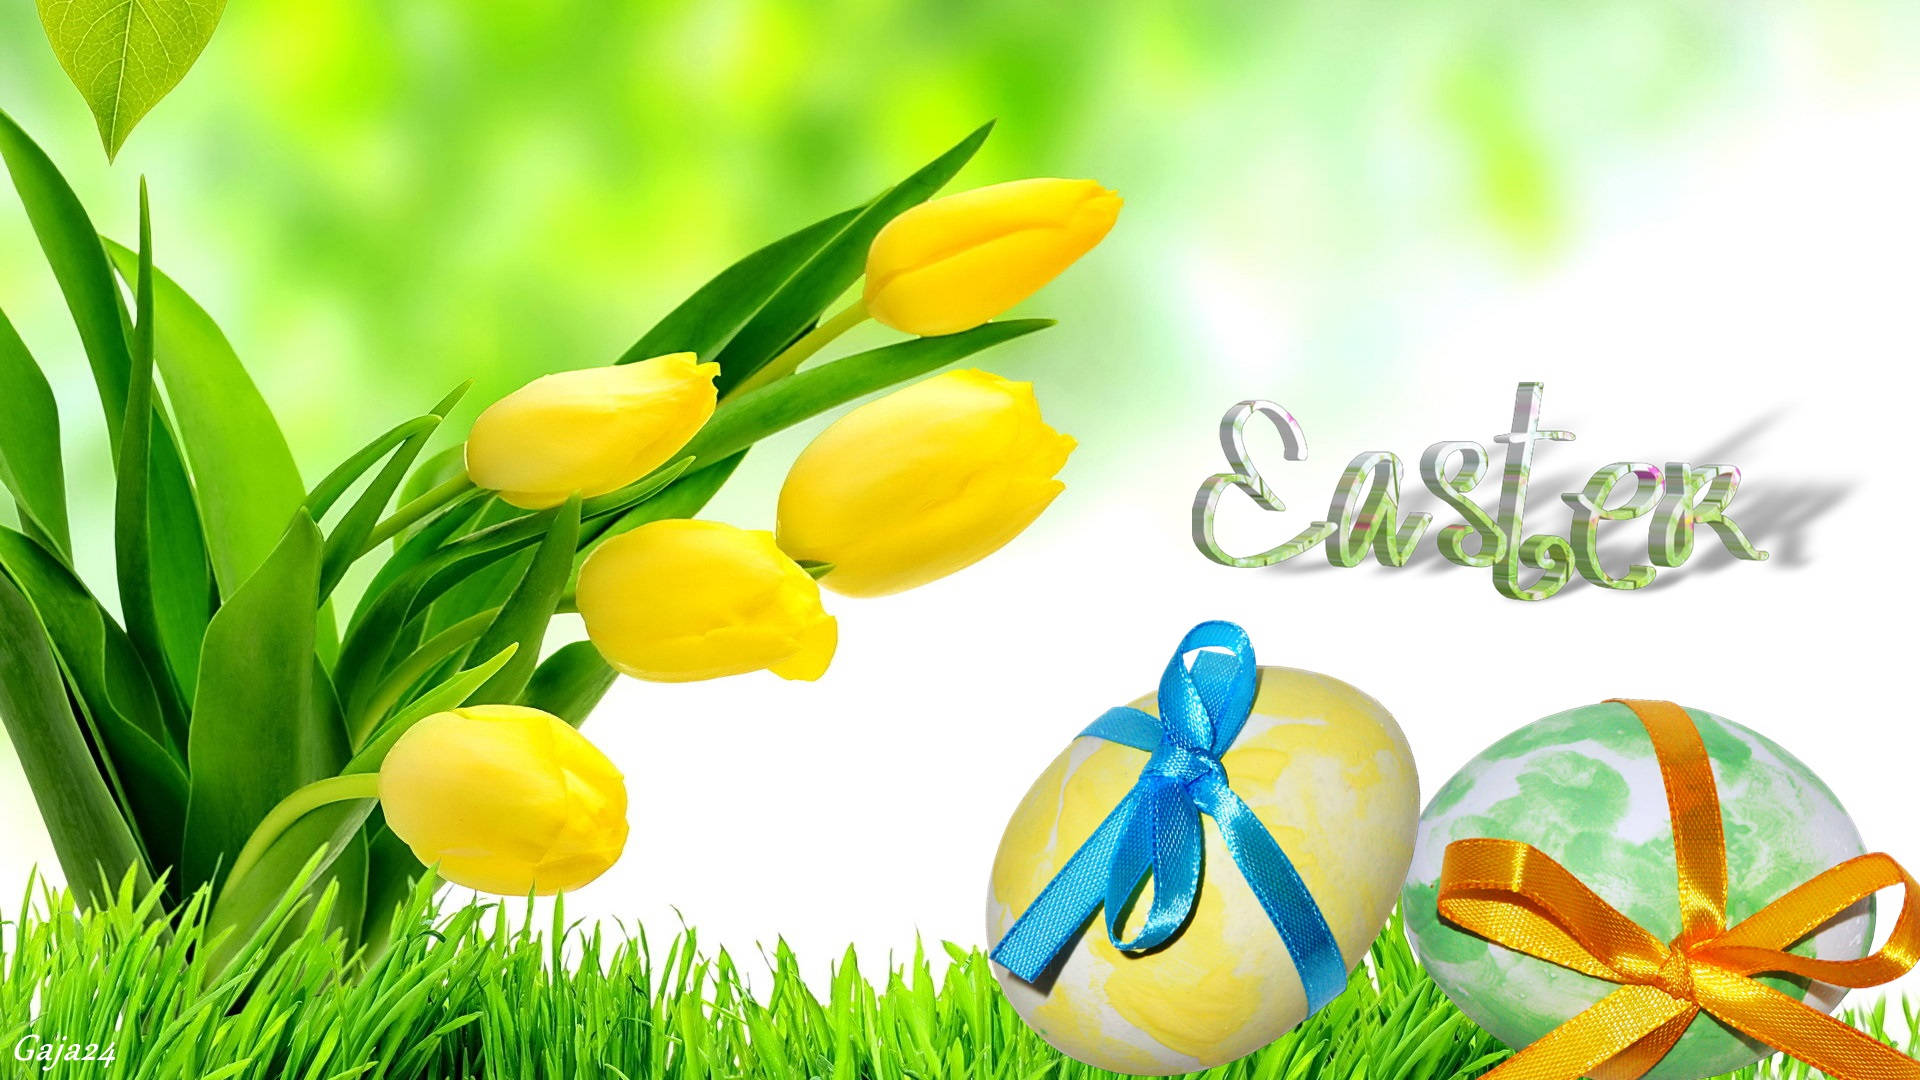 Cute Easter Greeting Background